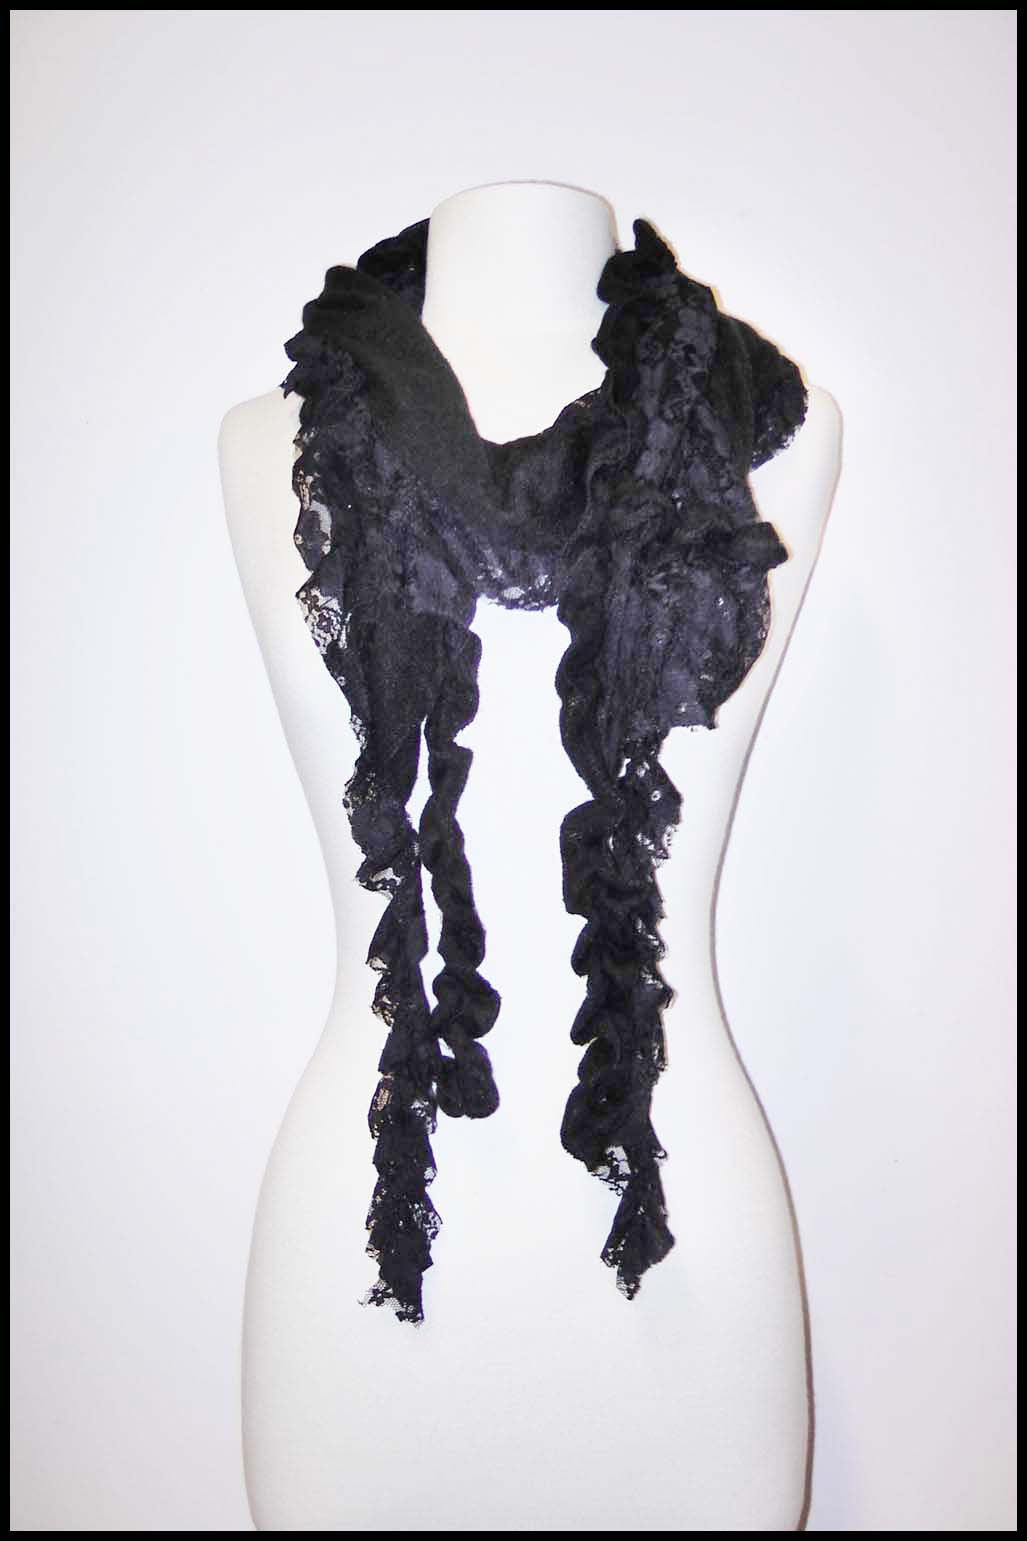 Fine Knit and Lace Scarf with Ruffled Edges